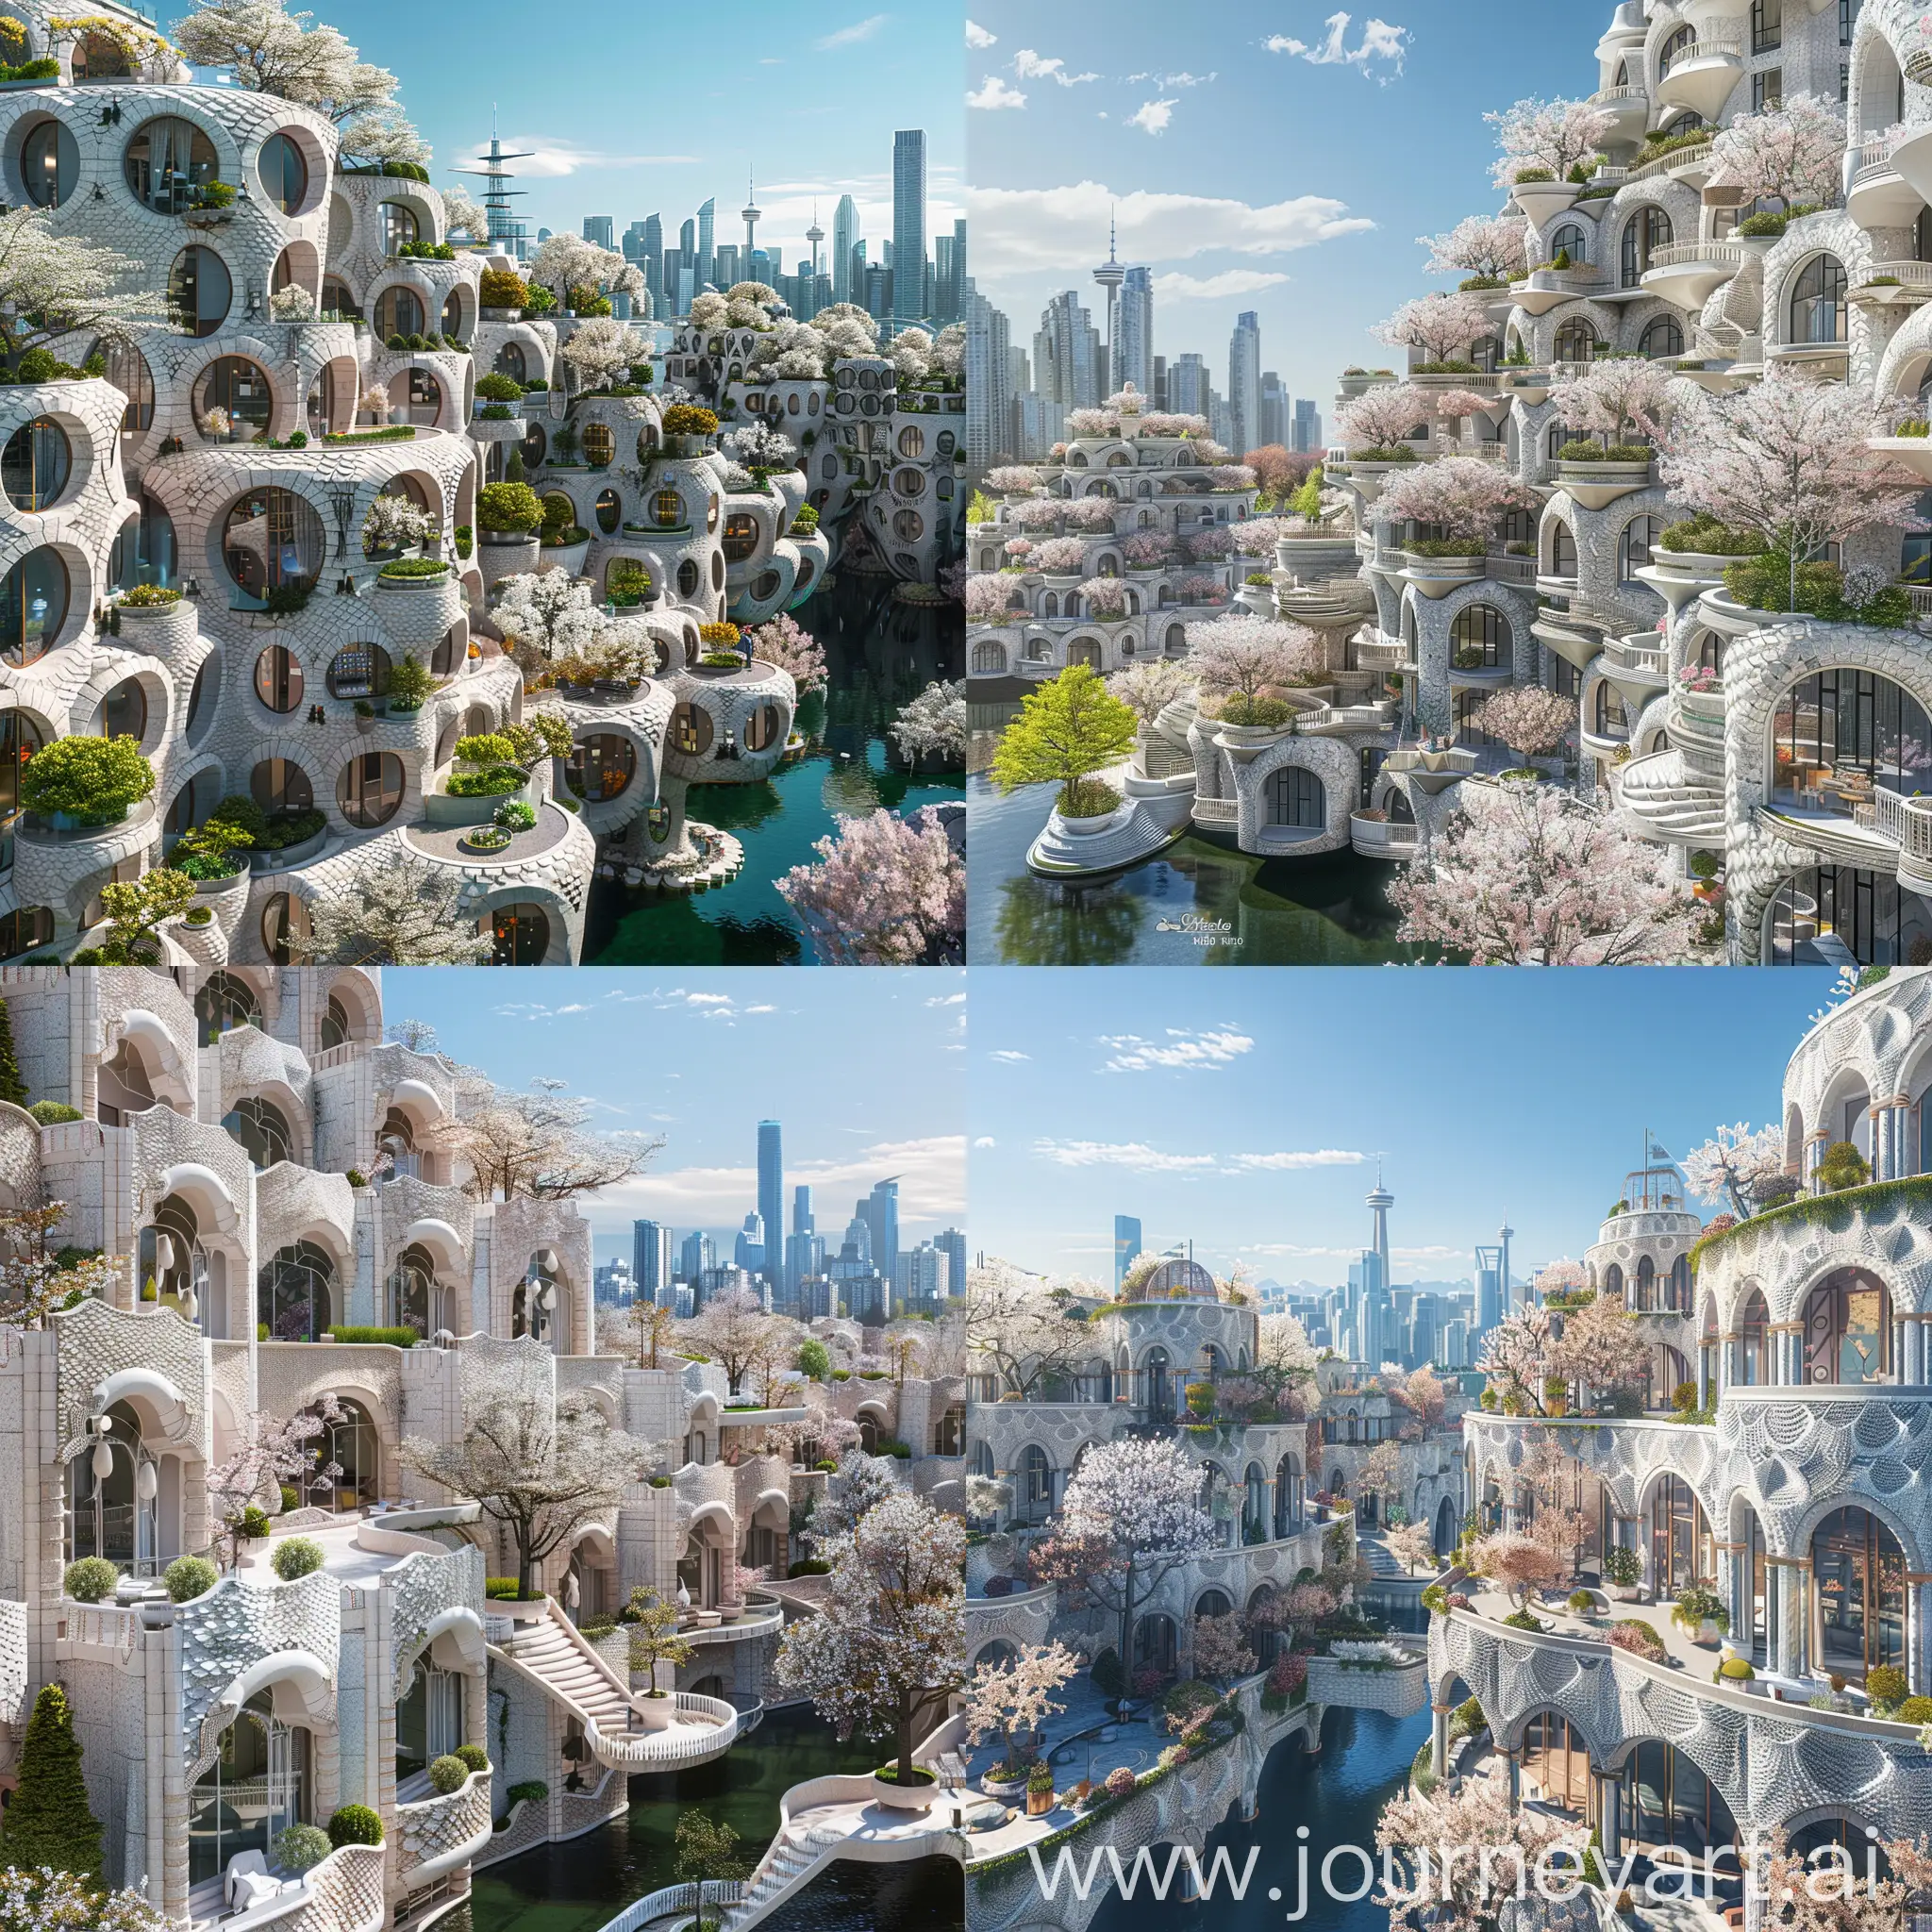 Beautiful futuristic metropolis in an alternate timeline where all buildings retain traditional elements, ornate travertine architecture with scale-like patterns on facades and blossoming trees, monumental terraced buildings, canals, Vancouver vibe, spring, supertall skyline in distance, blue sky, photograph